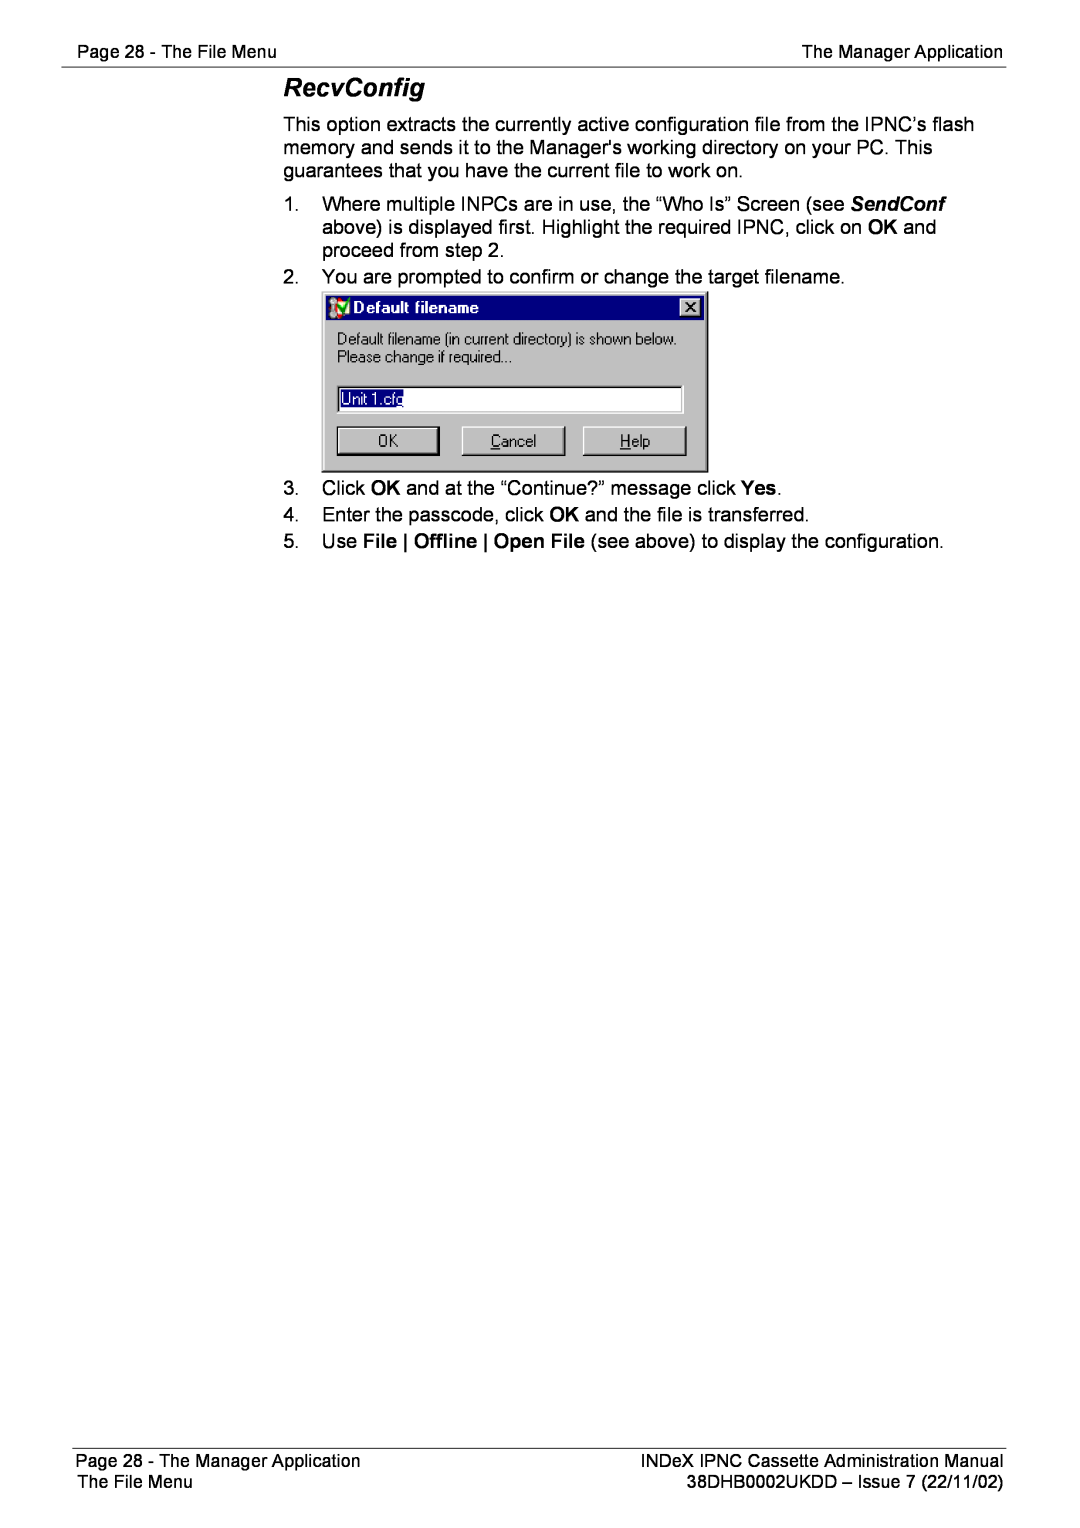 Avaya manual RecvConfig, Page 28 - The File Menu, The Manager Application, 38DHB0002UKDD – Issue 7 22/11/02 